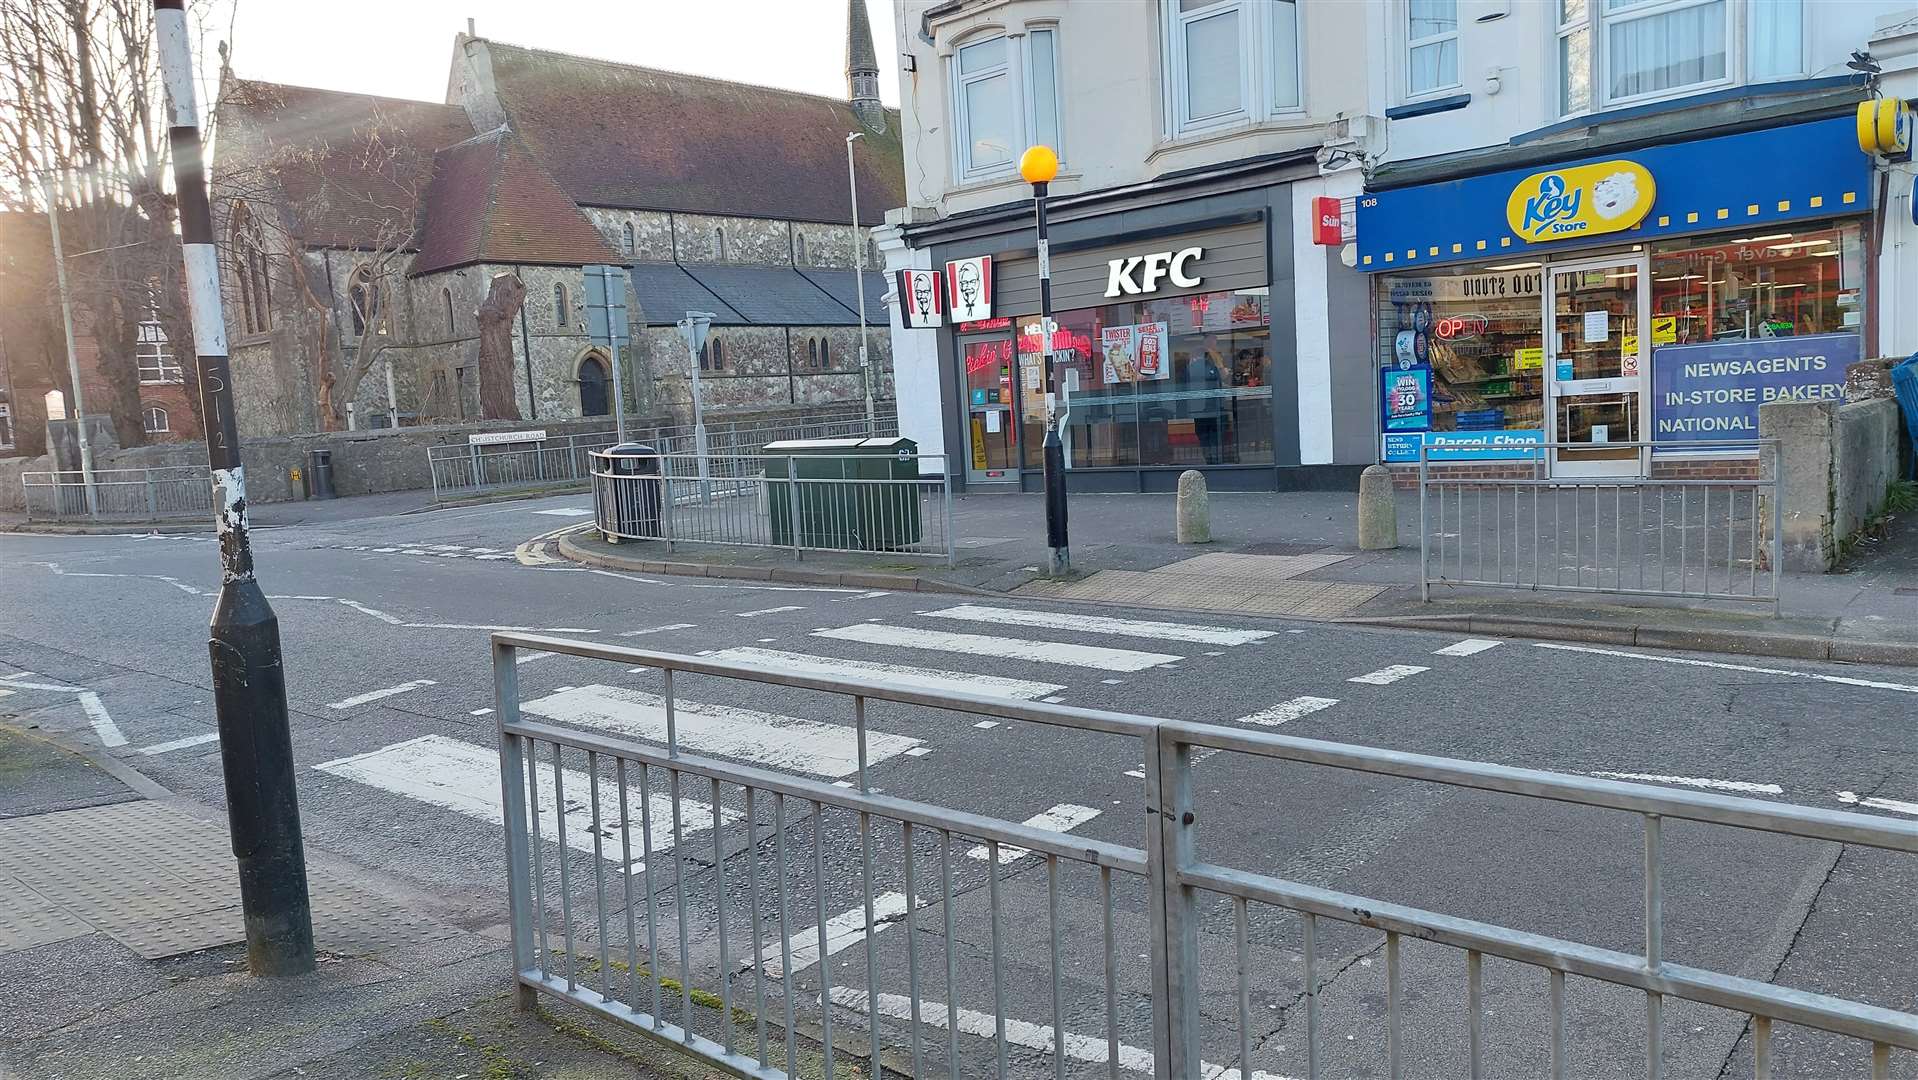 The crossing outside KFC has been described as a "serious hazard for pedestrians"